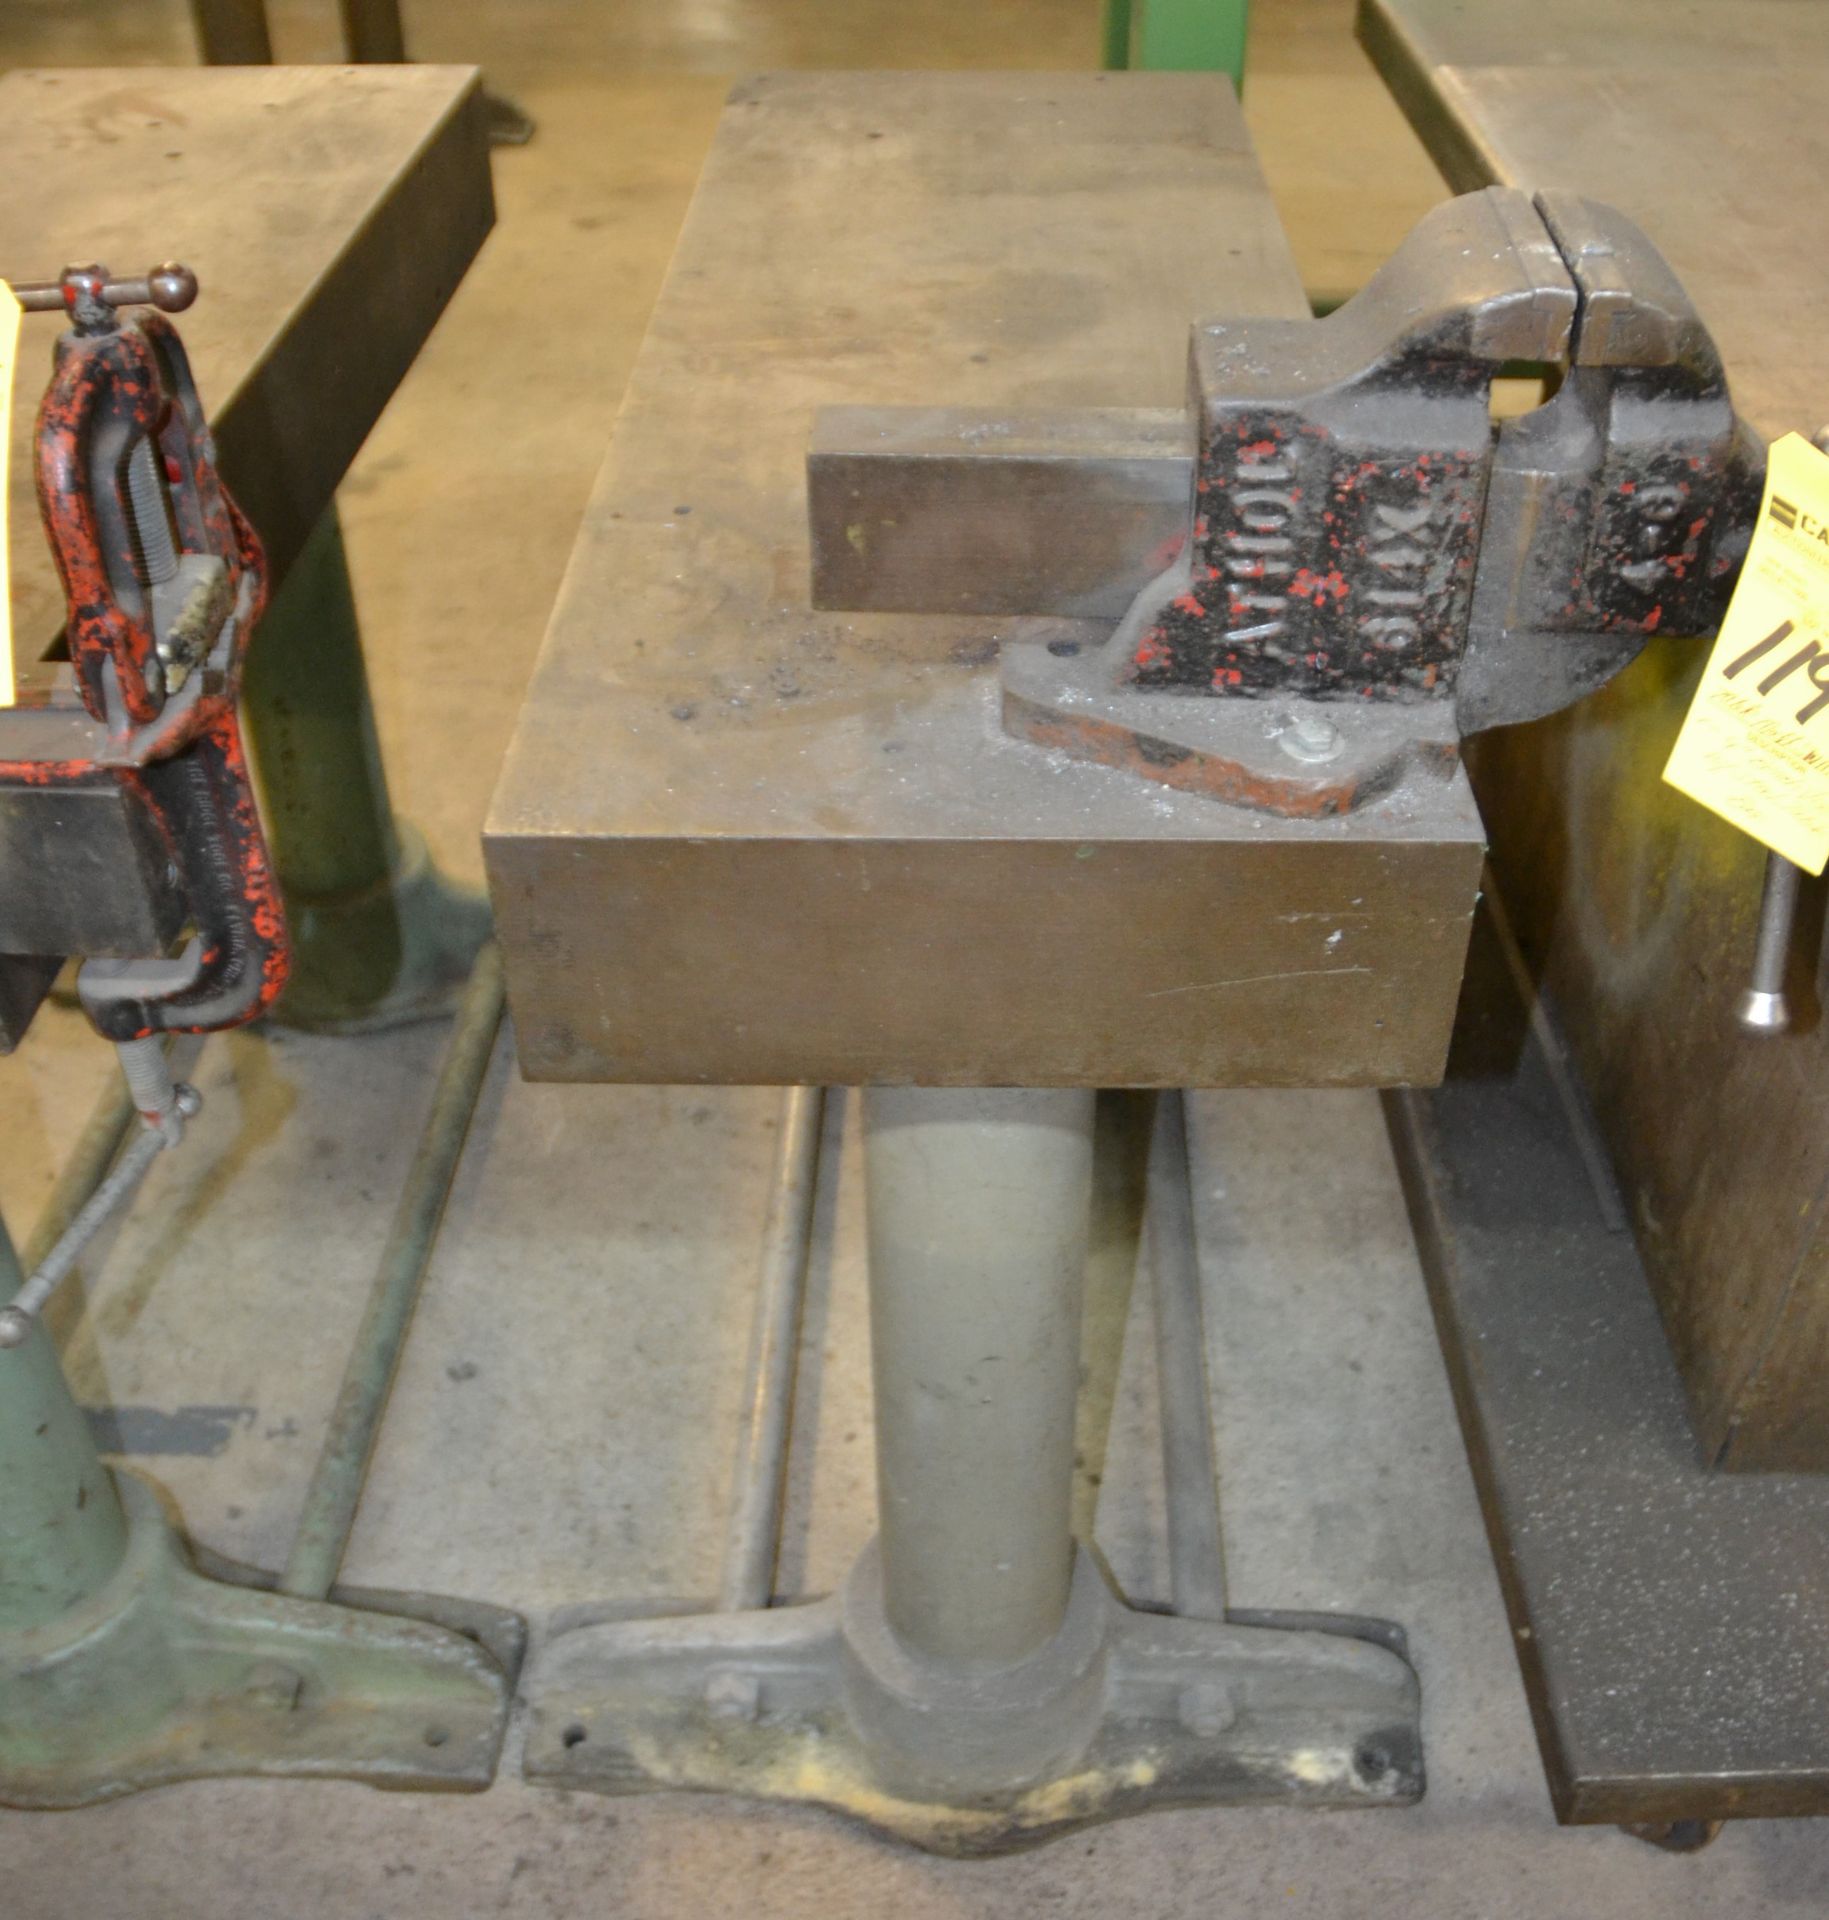 15" X 40" STEEL TABLE W/ 4" BENCH VISE